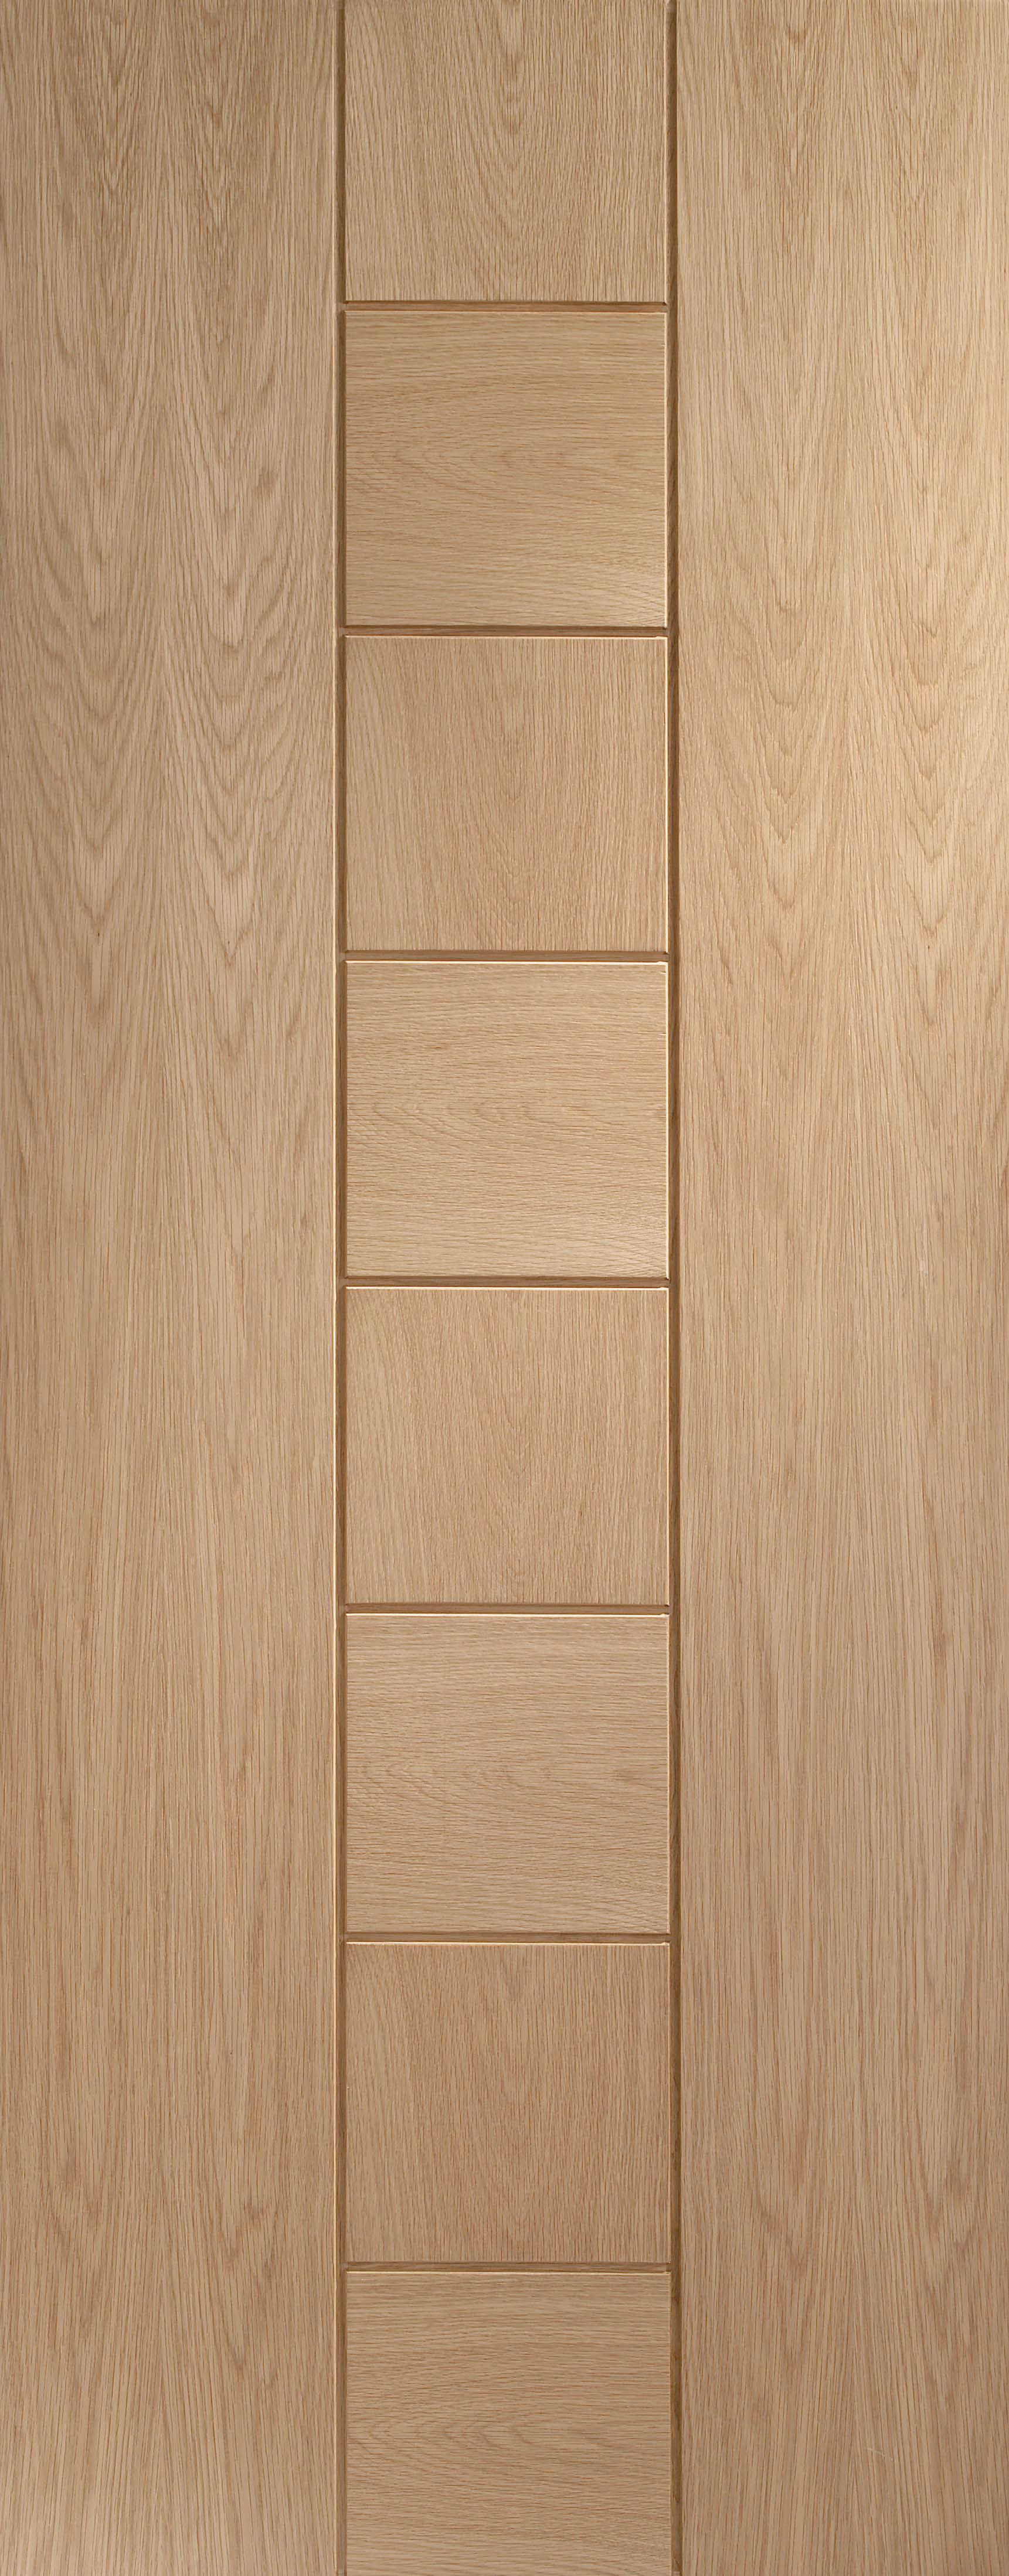 Image of XL Joinery Messina Oak 8 Panel Pre Finished Internal Door- 1981 x 838mm